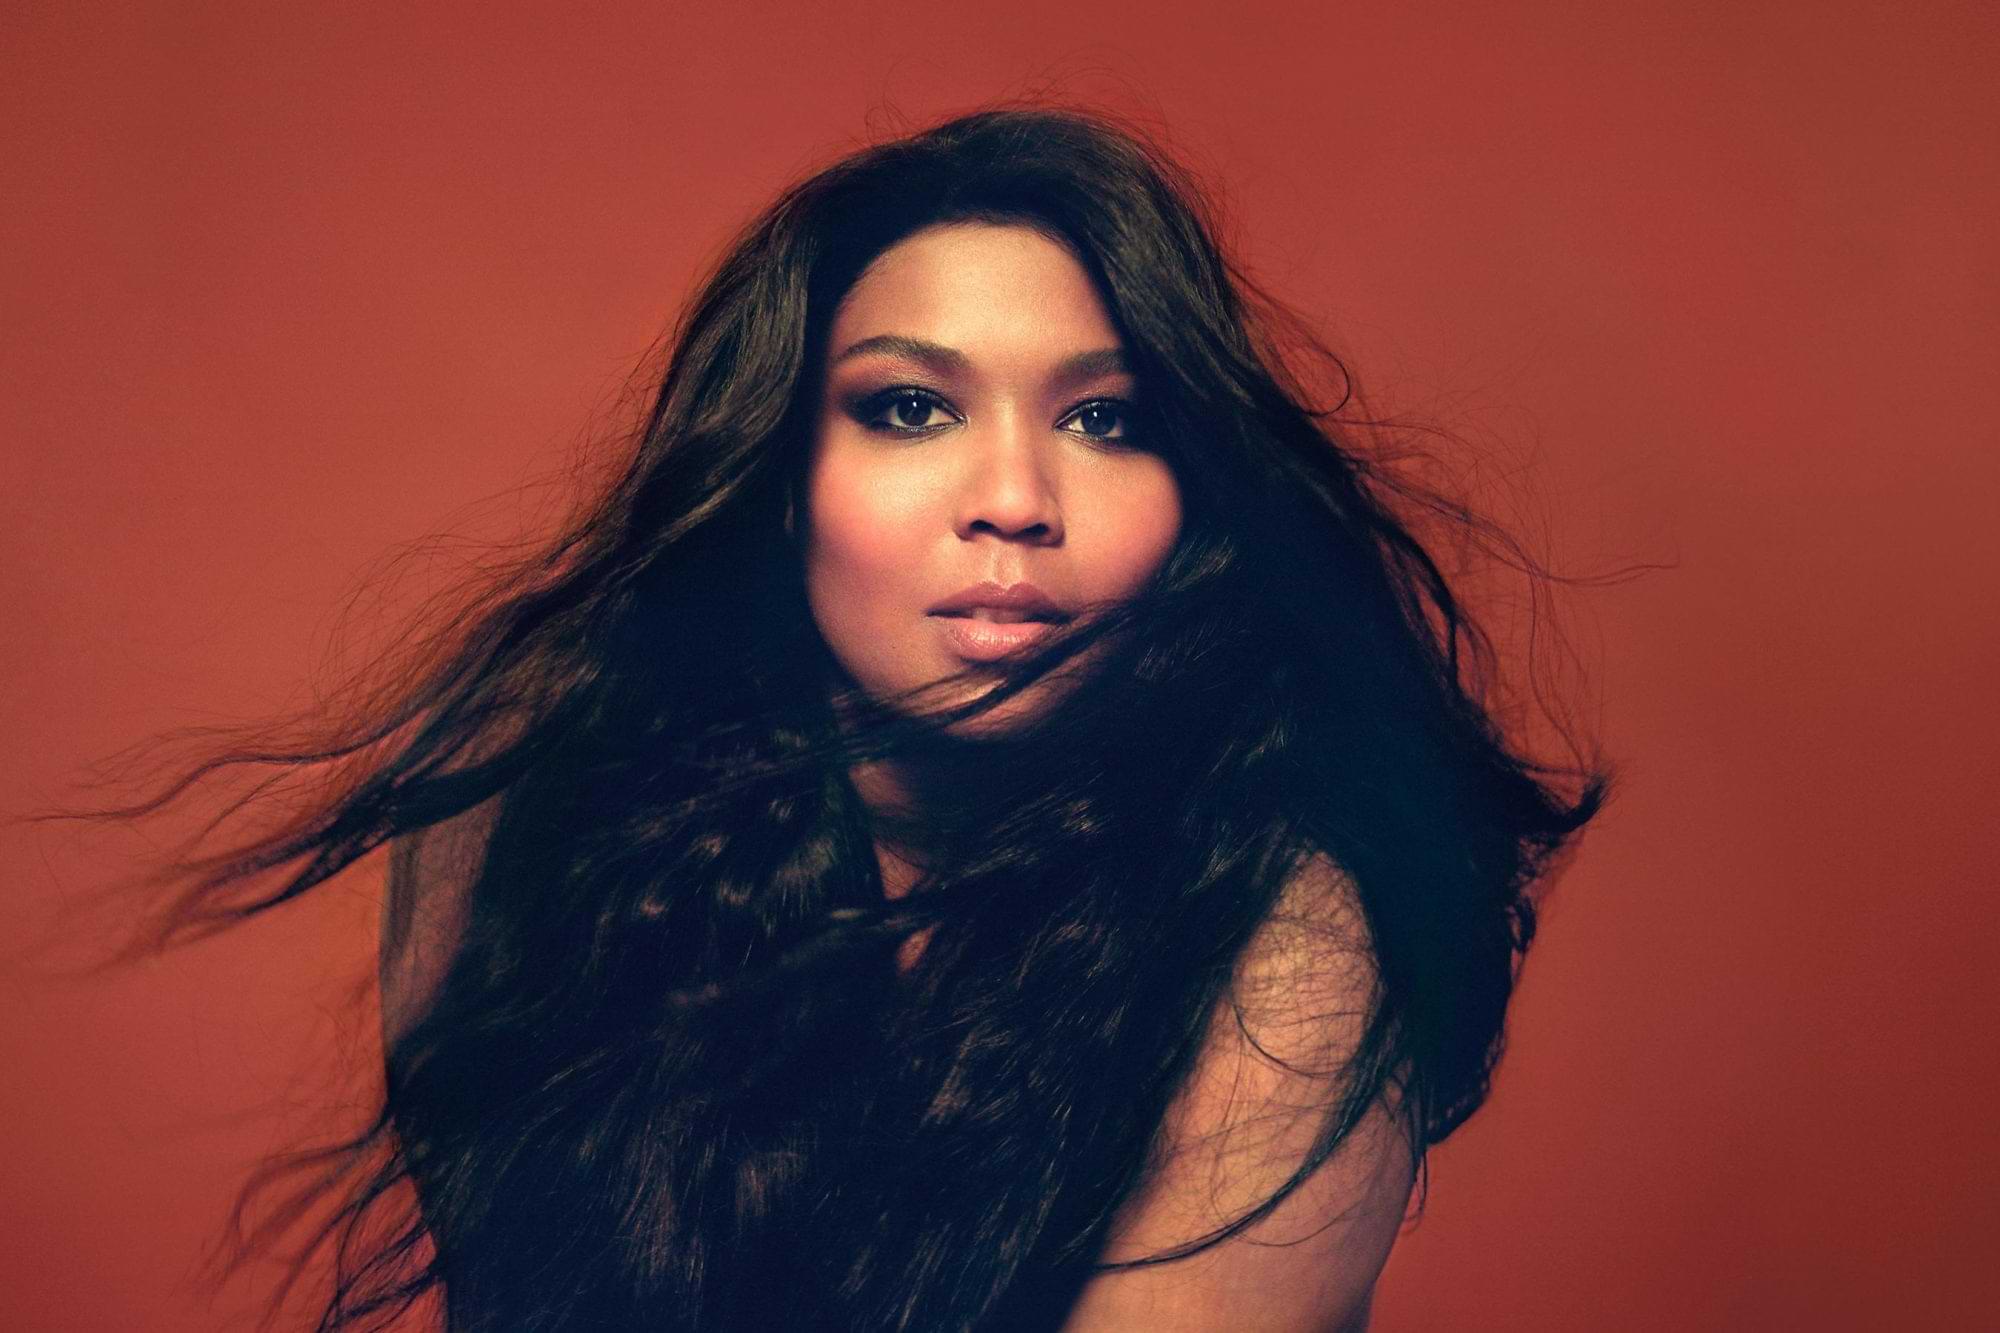 Everything you need to know about Lizzo-age, status, net worth